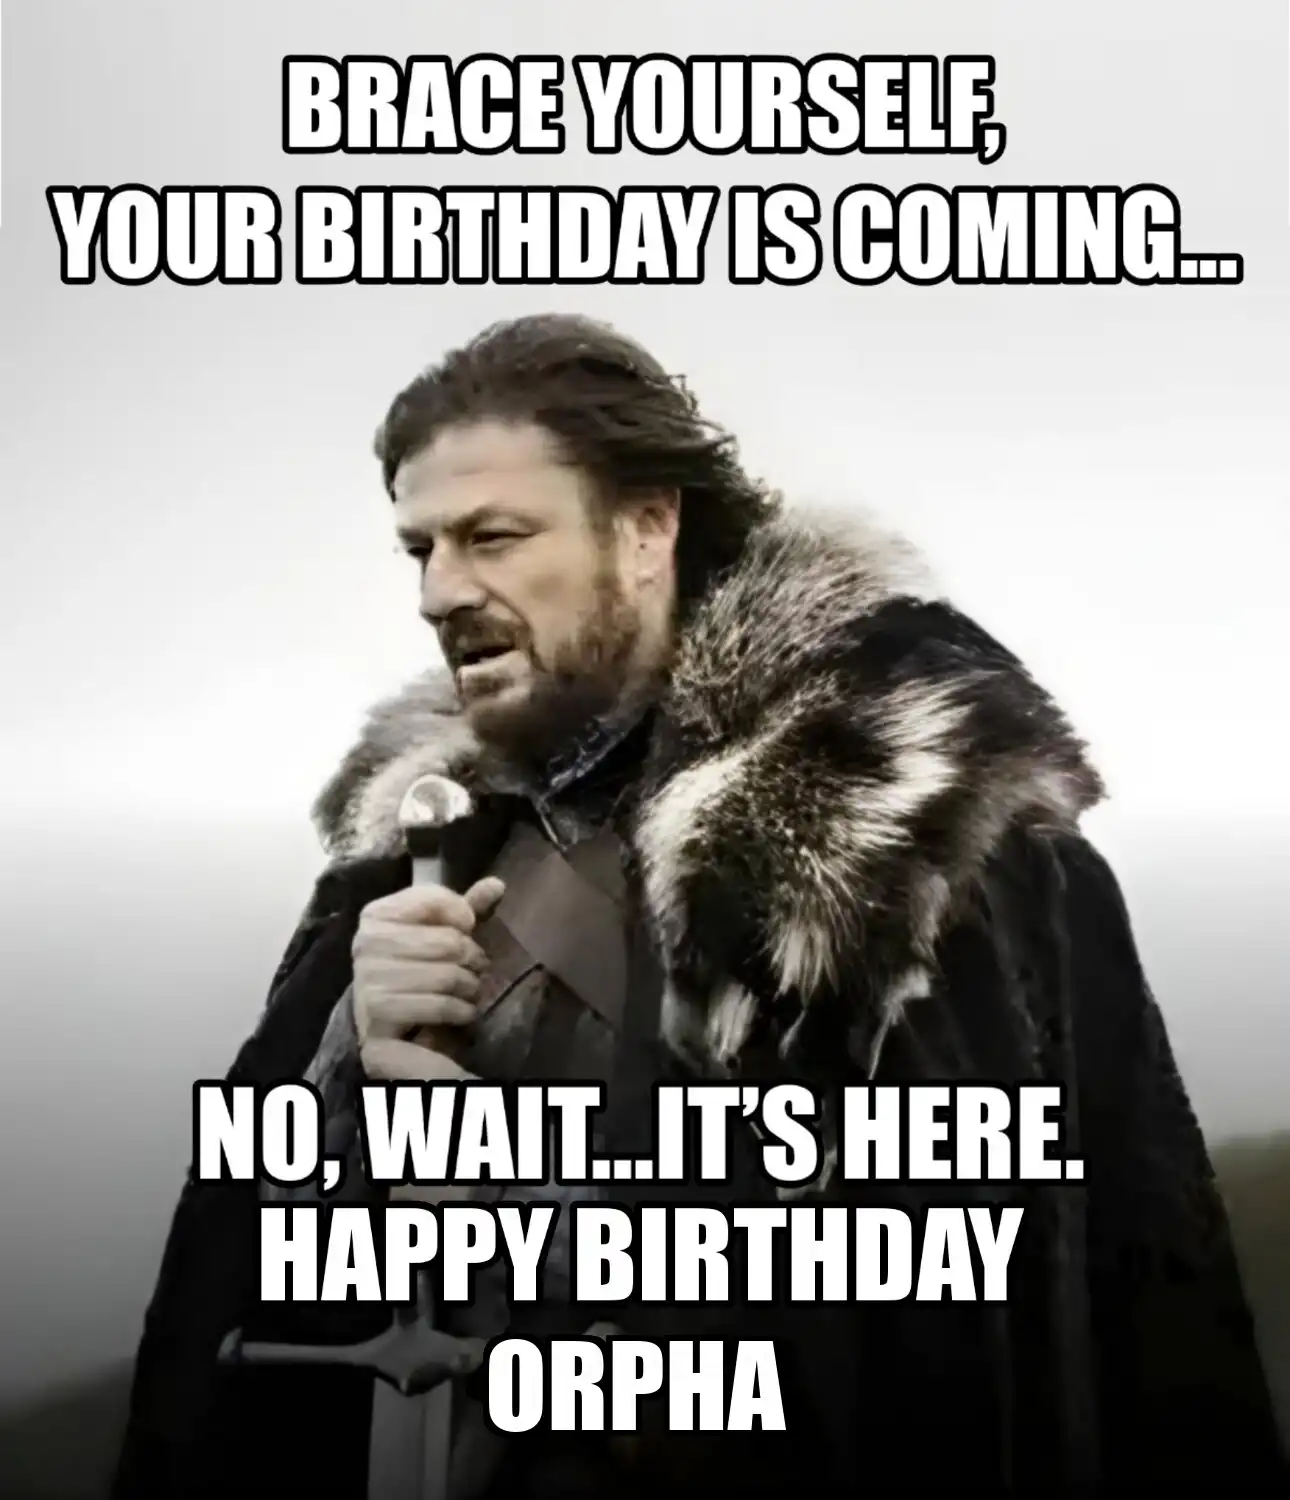 Happy Birthday Orpha Brace Yourself Your Birthday Is Coming Meme